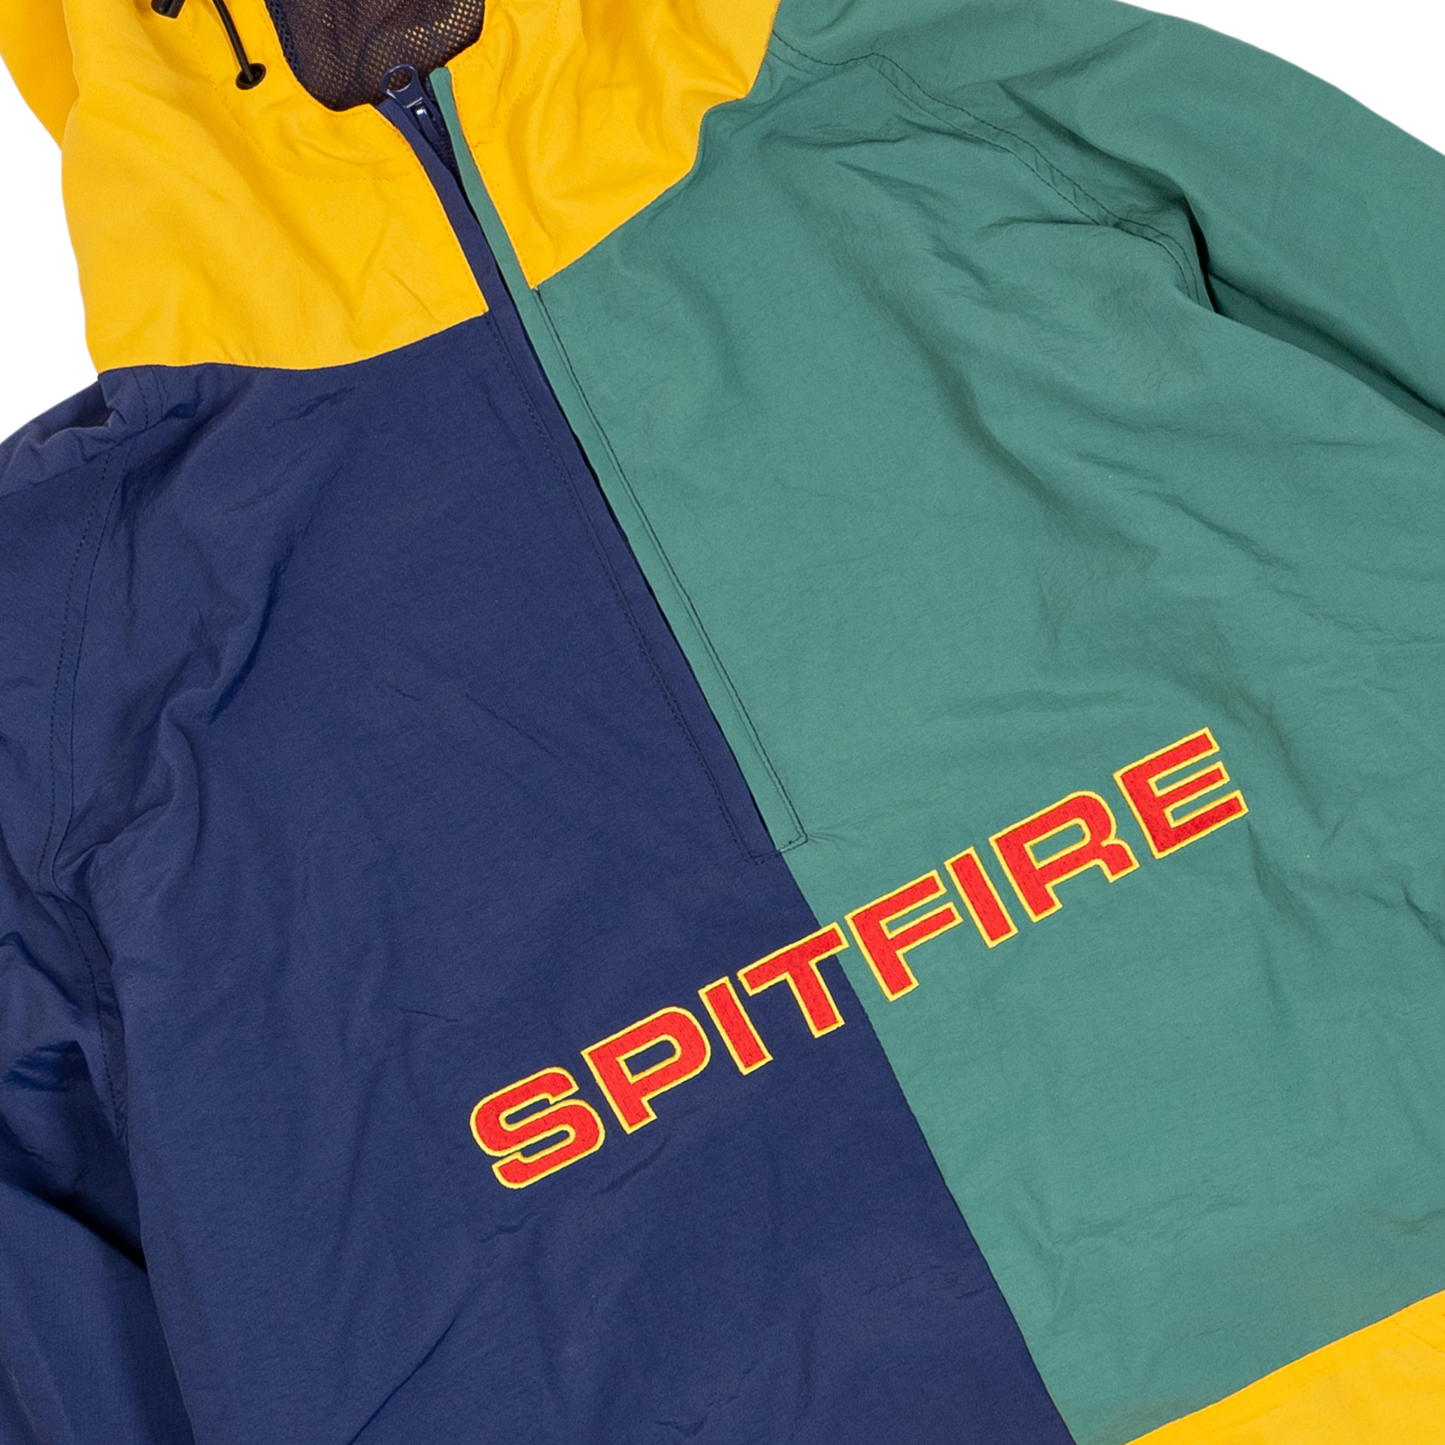 Spitfire Limited Classic 87 Quarter Zip Pullover Jacket - Green/Navy